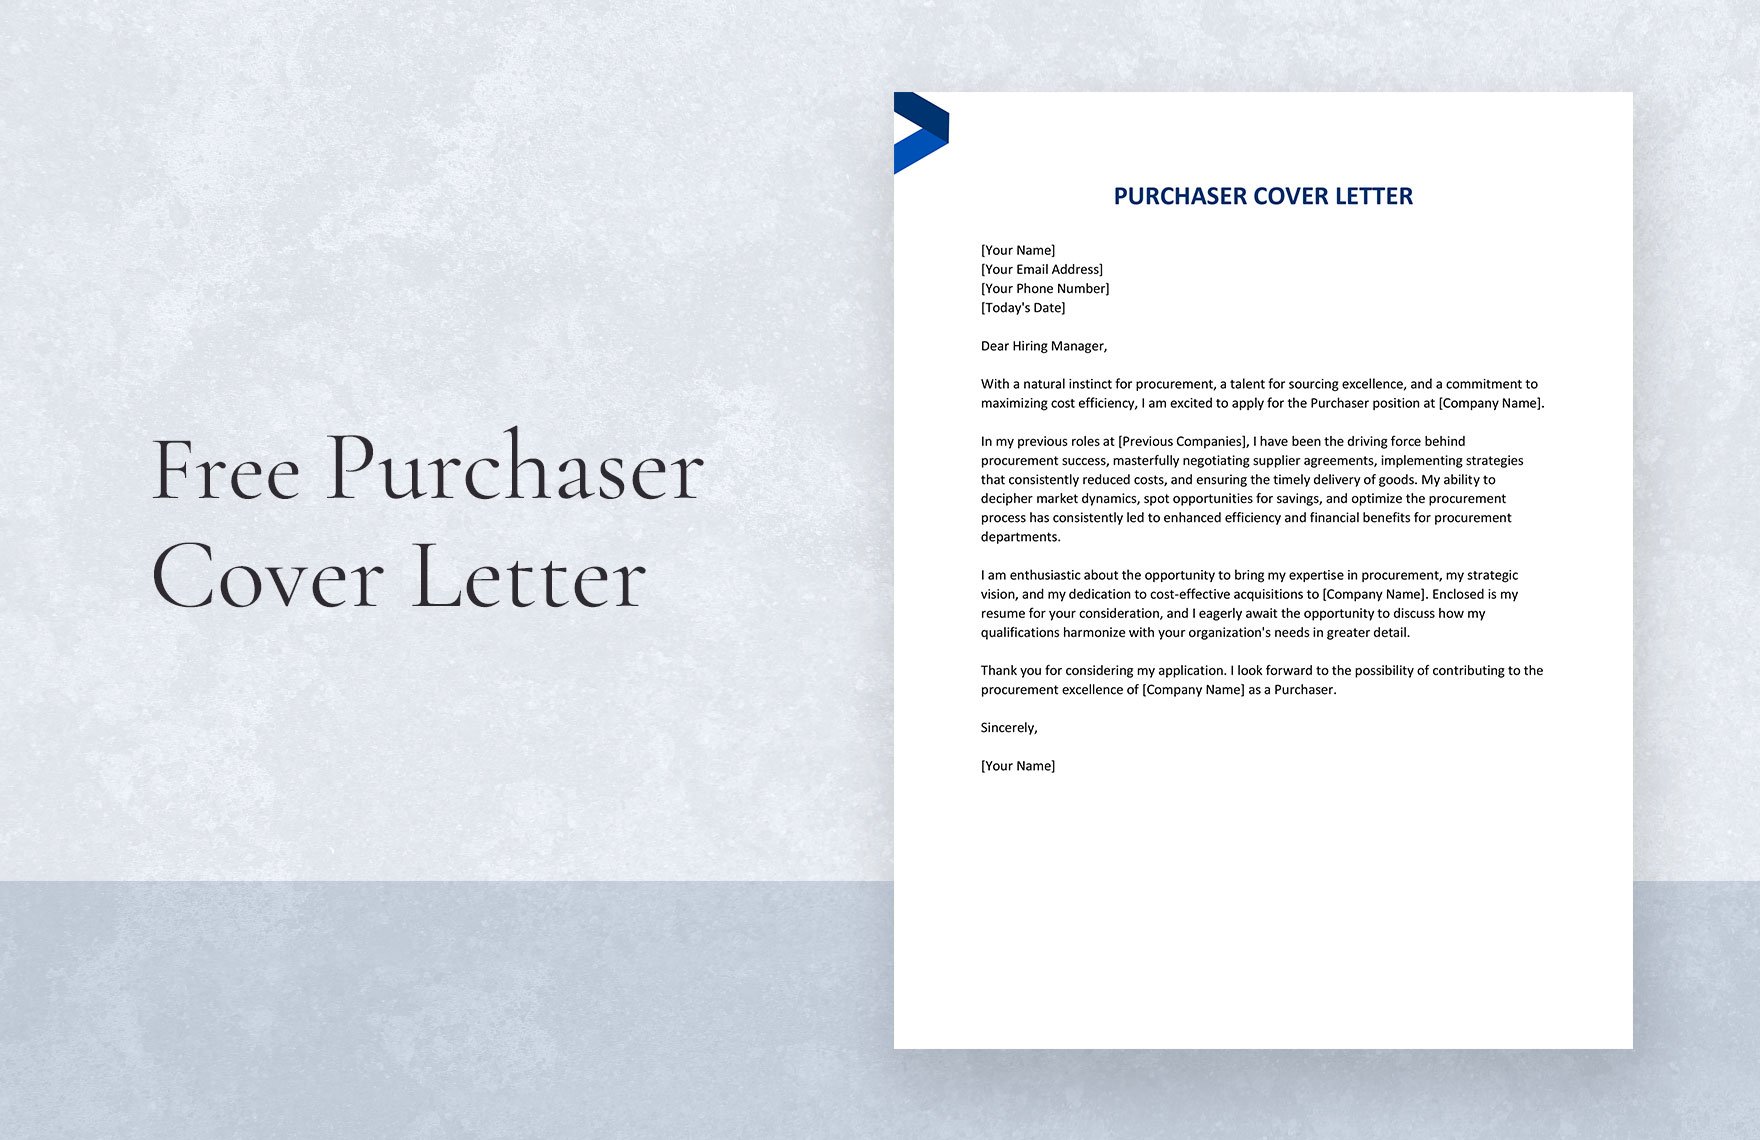 Purchaser Cover Letter in Word, Google Docs